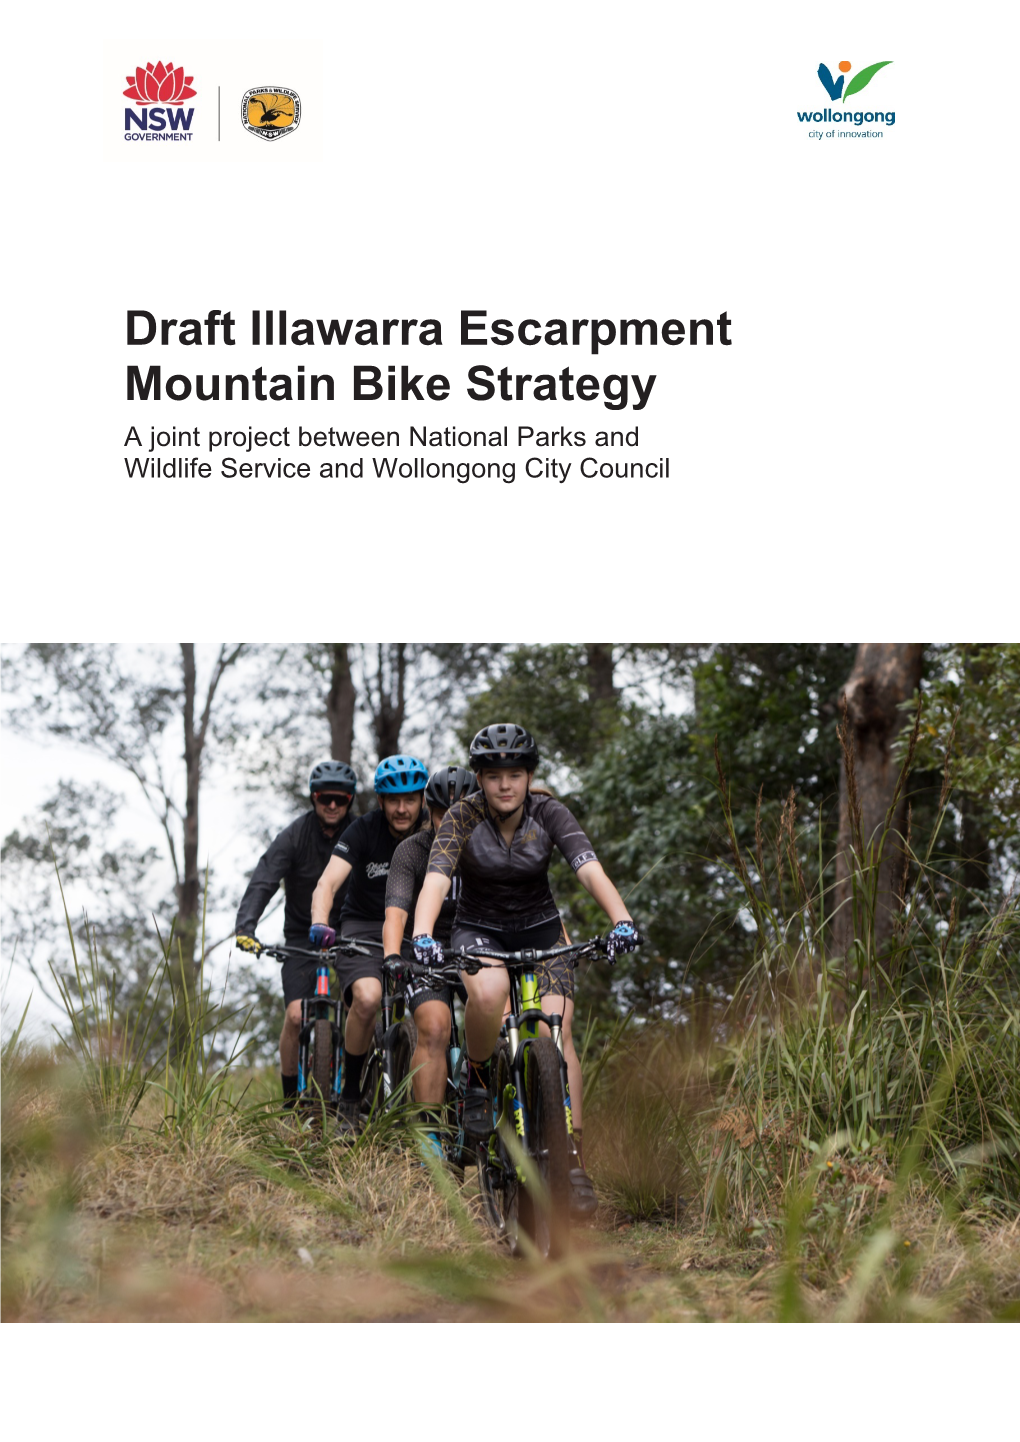 Draft Illawarra Escarpment Mountain Bike Strategy a Joint Project Between National Parks and Wildlife Service and Wollongong City Council